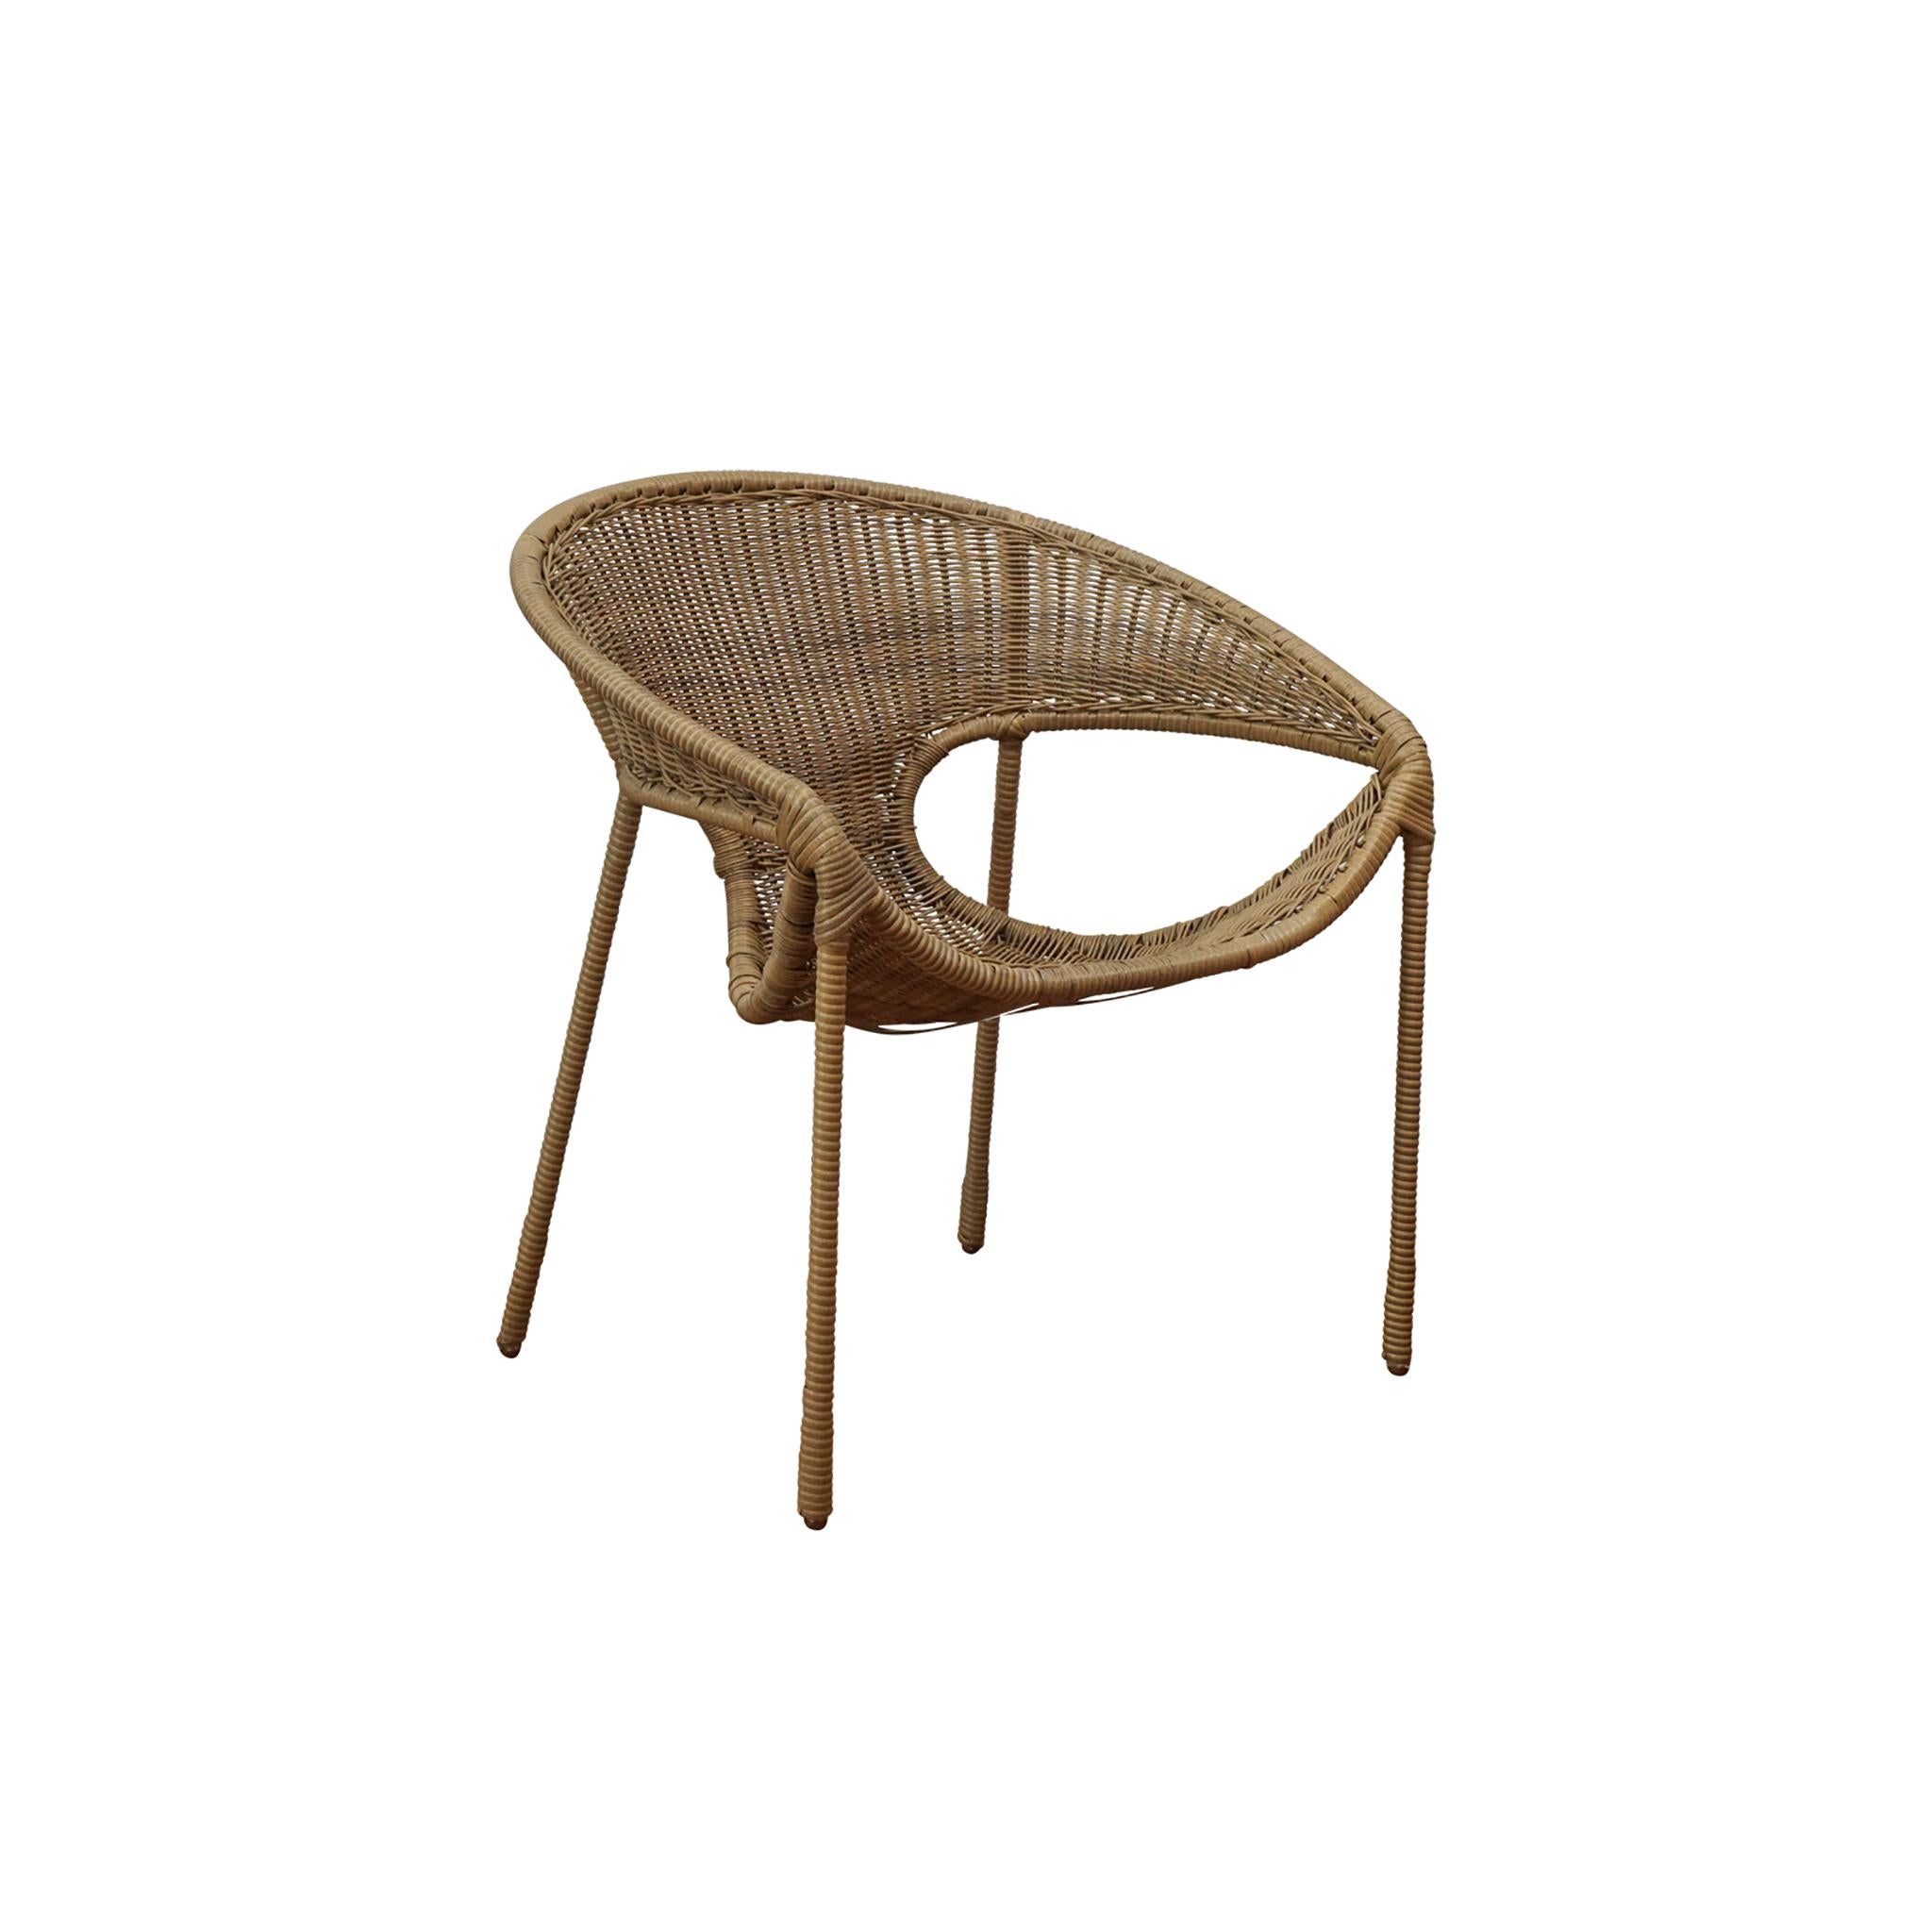 The Tulum dining chair was inspired by the classic Miller Fong chair and updated for outdoor use and comfort. The chair is constructed with a metal frame and woven polypropylene seat. Generously sized and designed for outdoor use, the chairs are